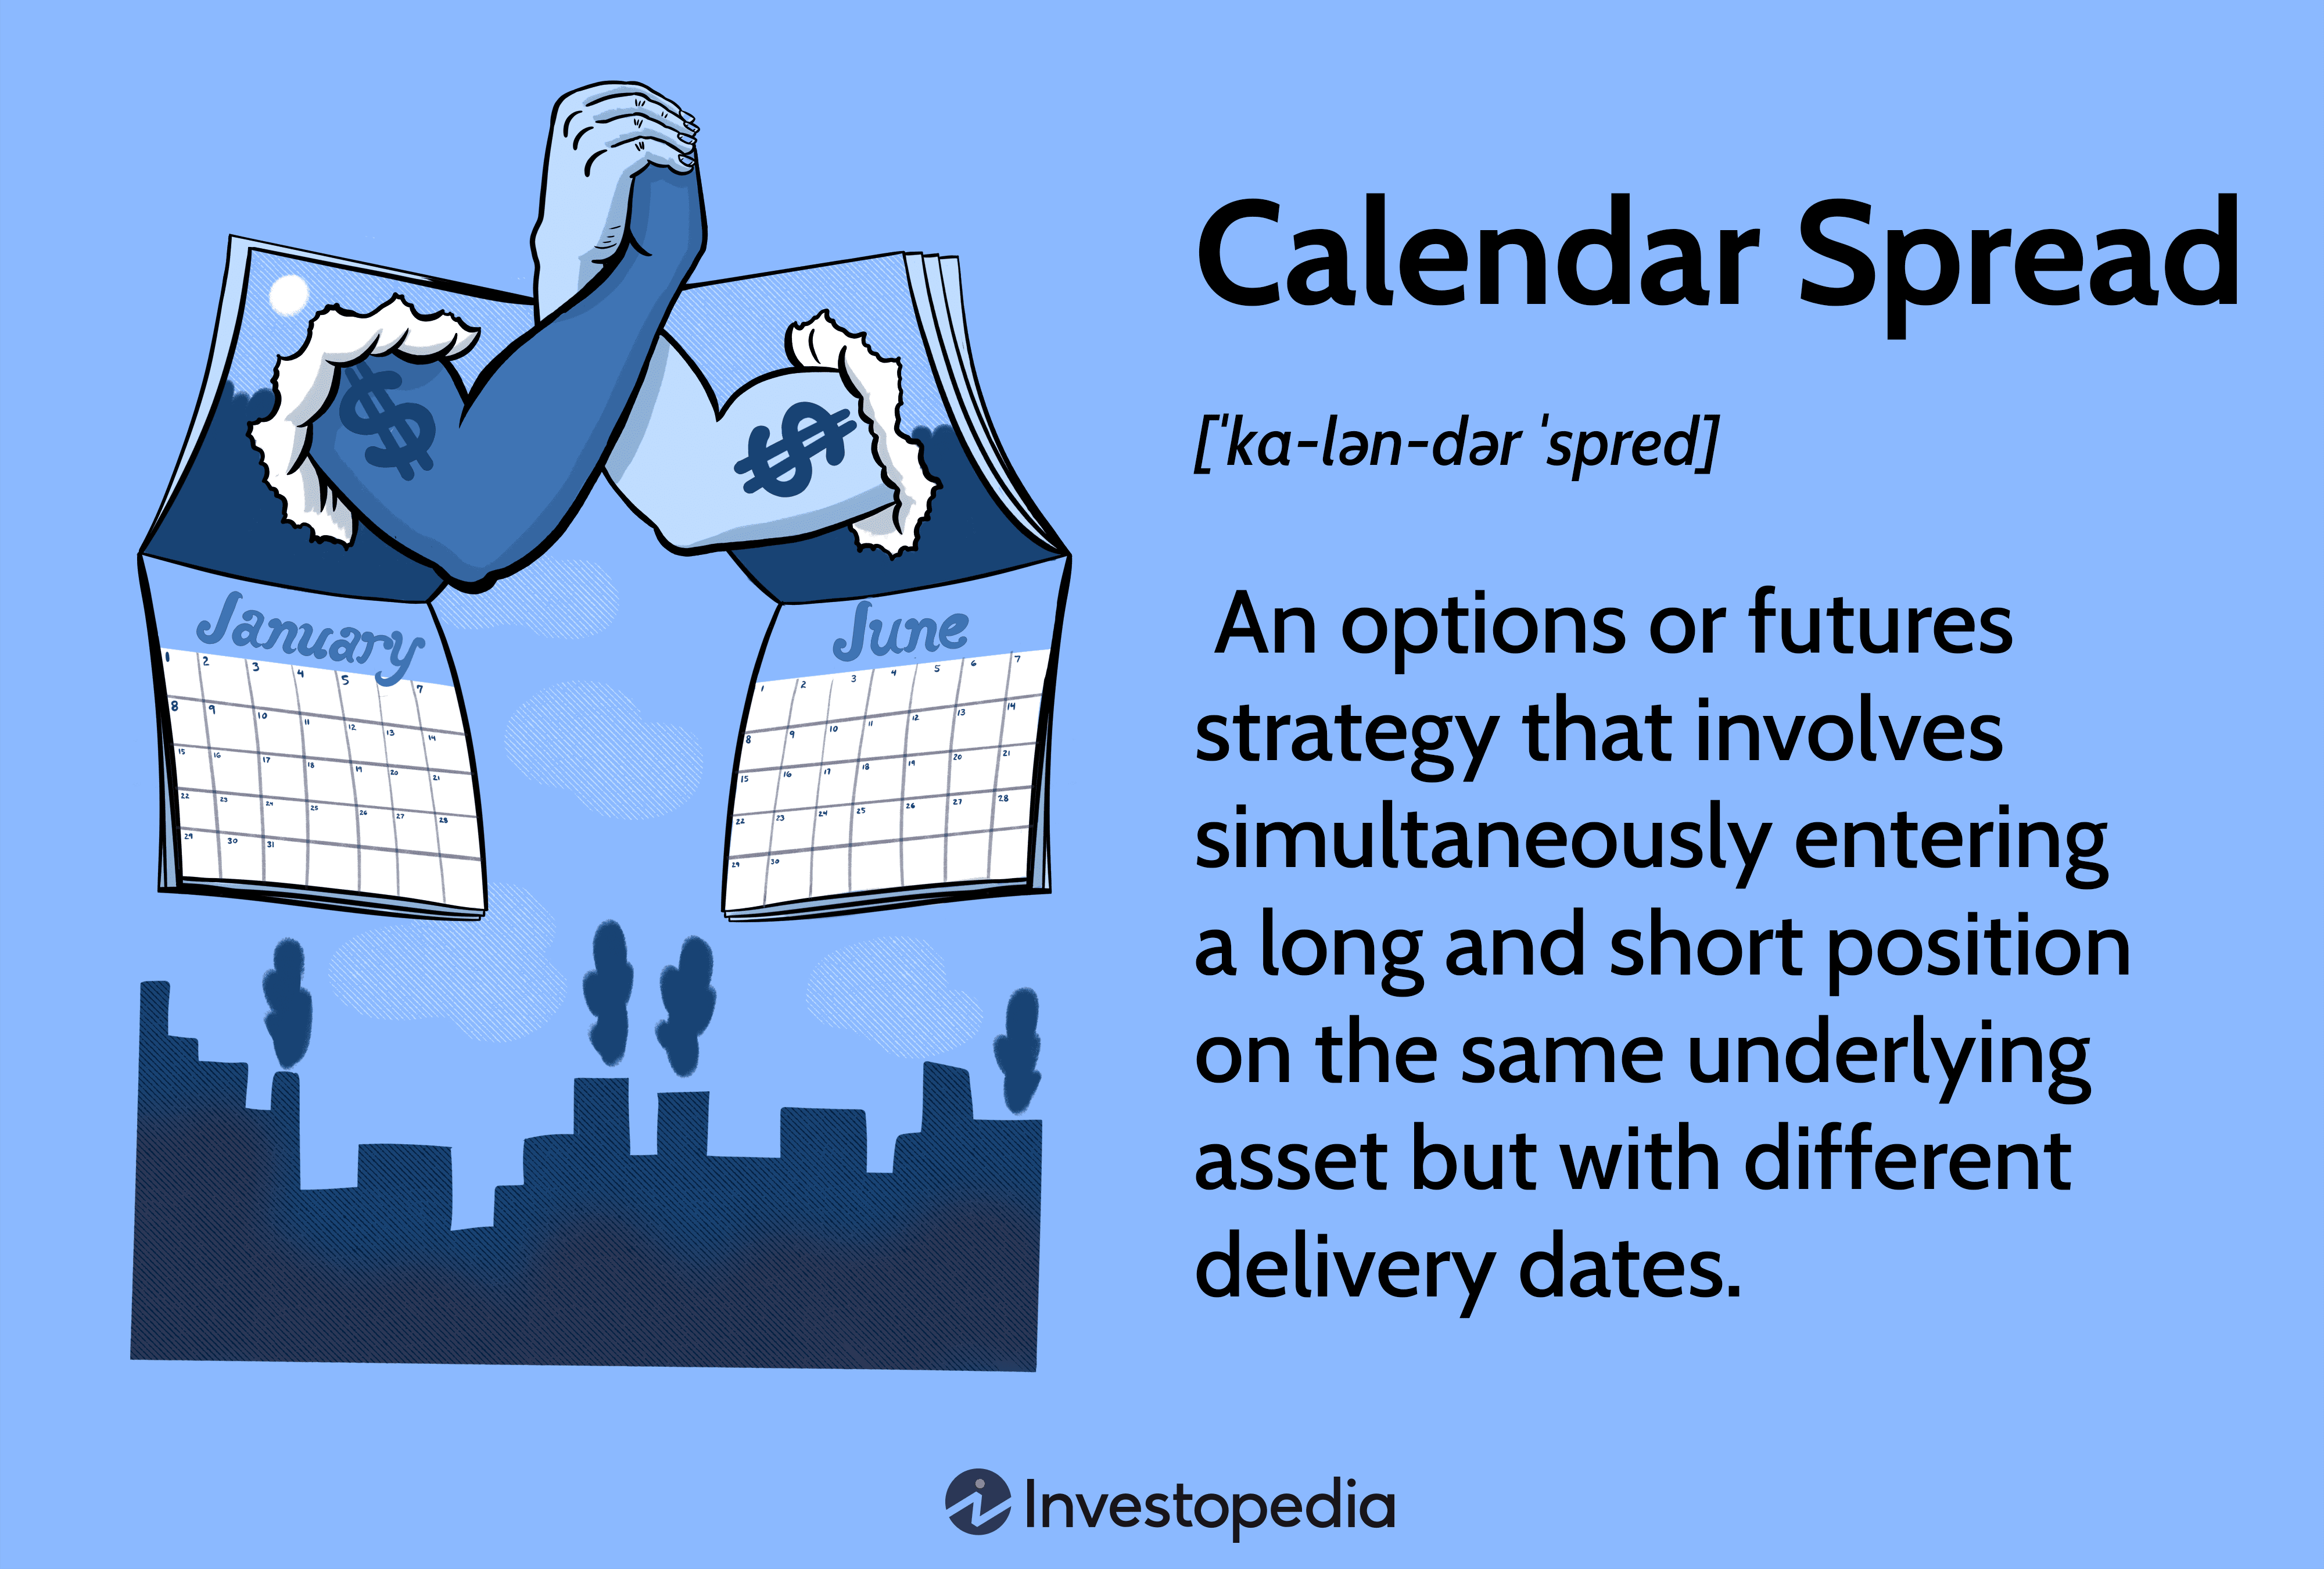 Calendar Spread: An options or futures strategy that involves simultaneously entering a long and short position on the same underlying asset but with different delivery dates.